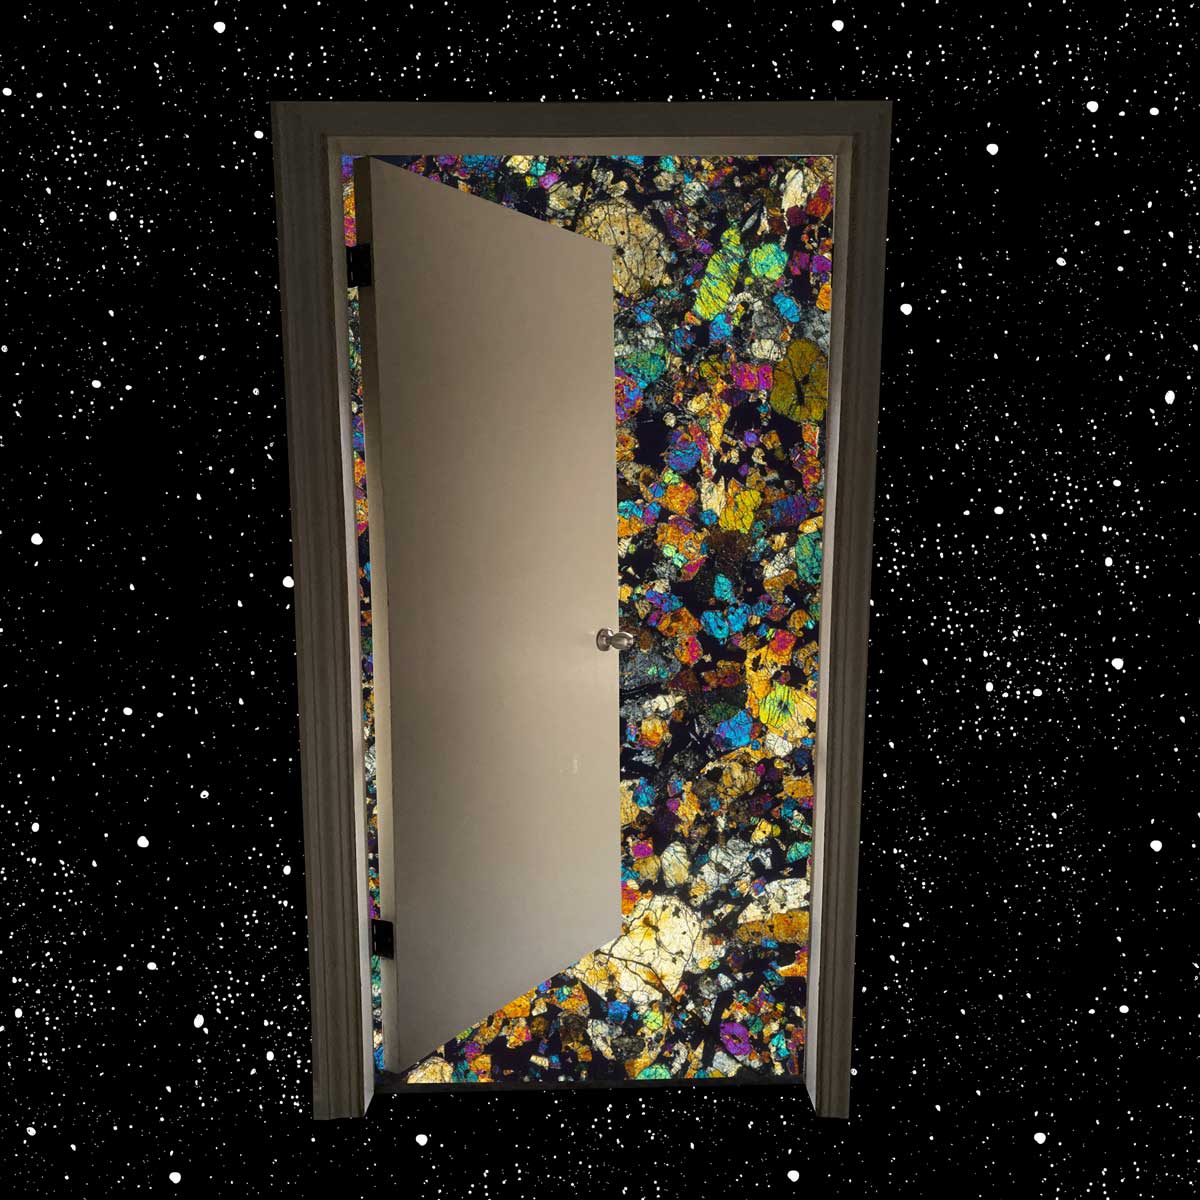 A half open door with colorful minerals behind it, set in a background of stars in space.